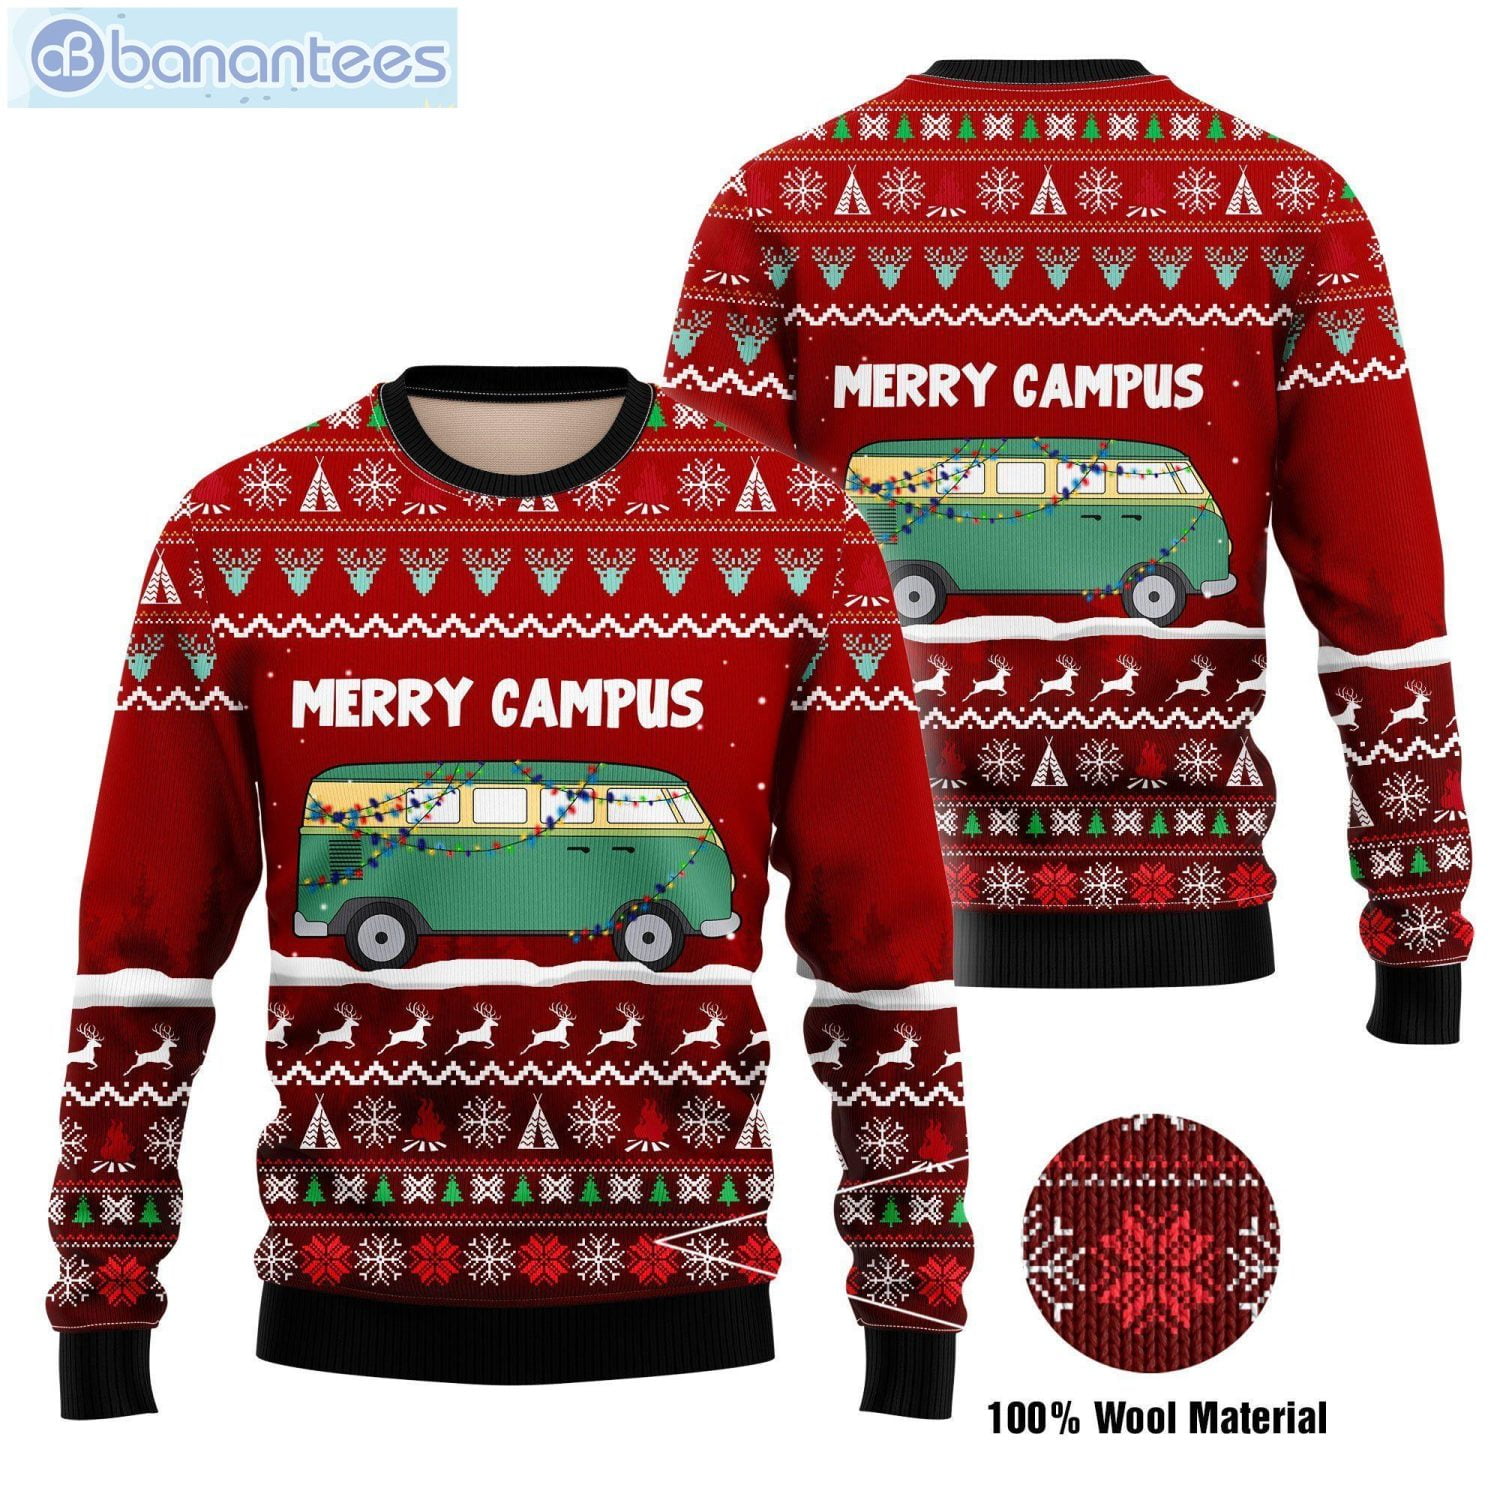 Merry Campus Christmas Ugly Sweater Product Photo 1 Product photo 1